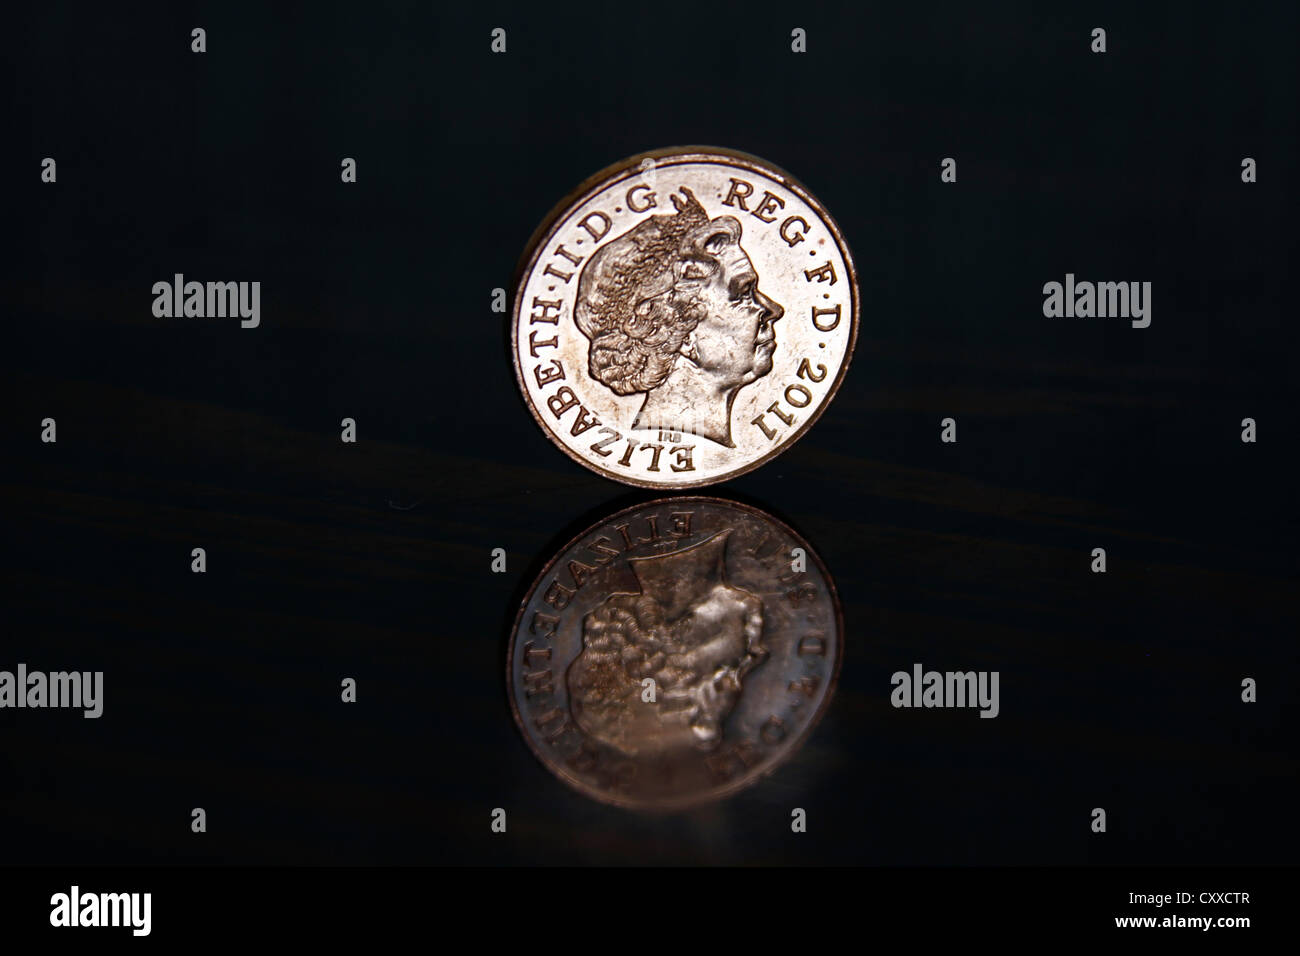 2 pence, two pence shiny coin on a high reflective black surface Stock Photo